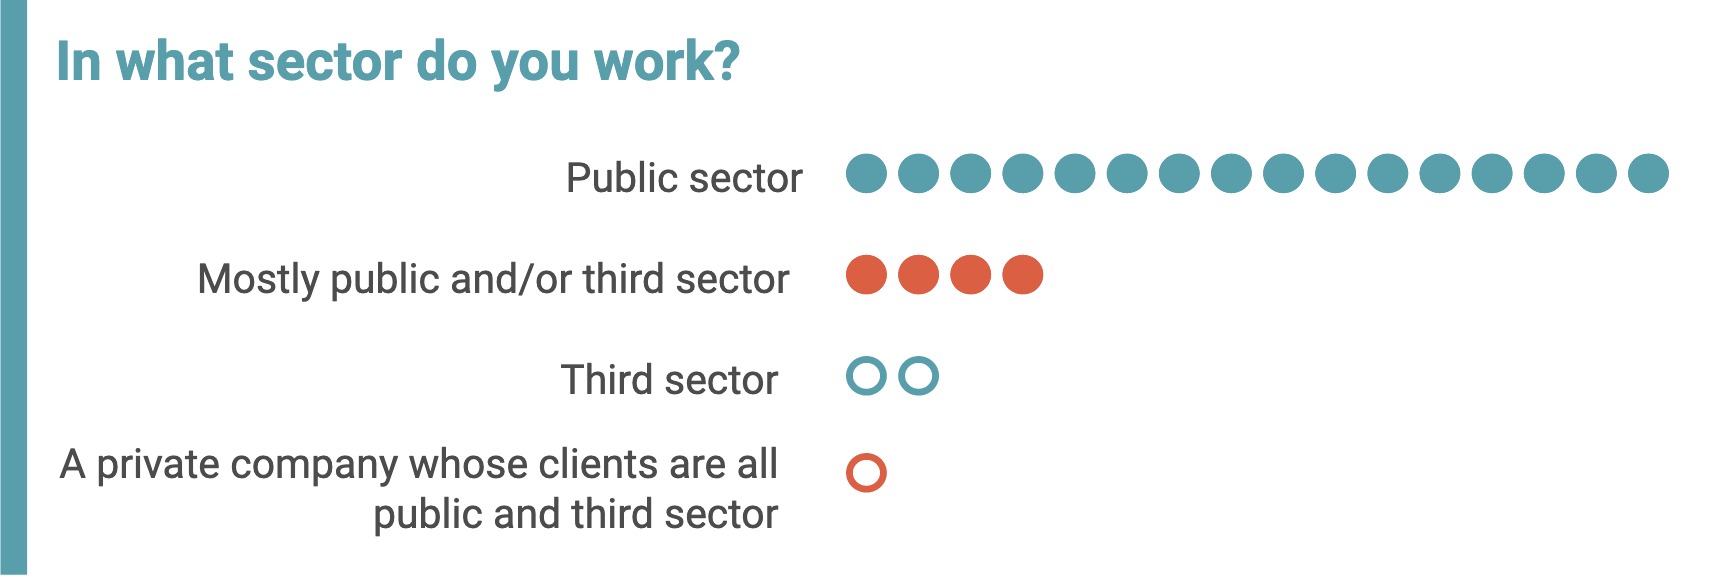 diagram to see the results of the question: 'In what sector do you work?' as a visual instead of text